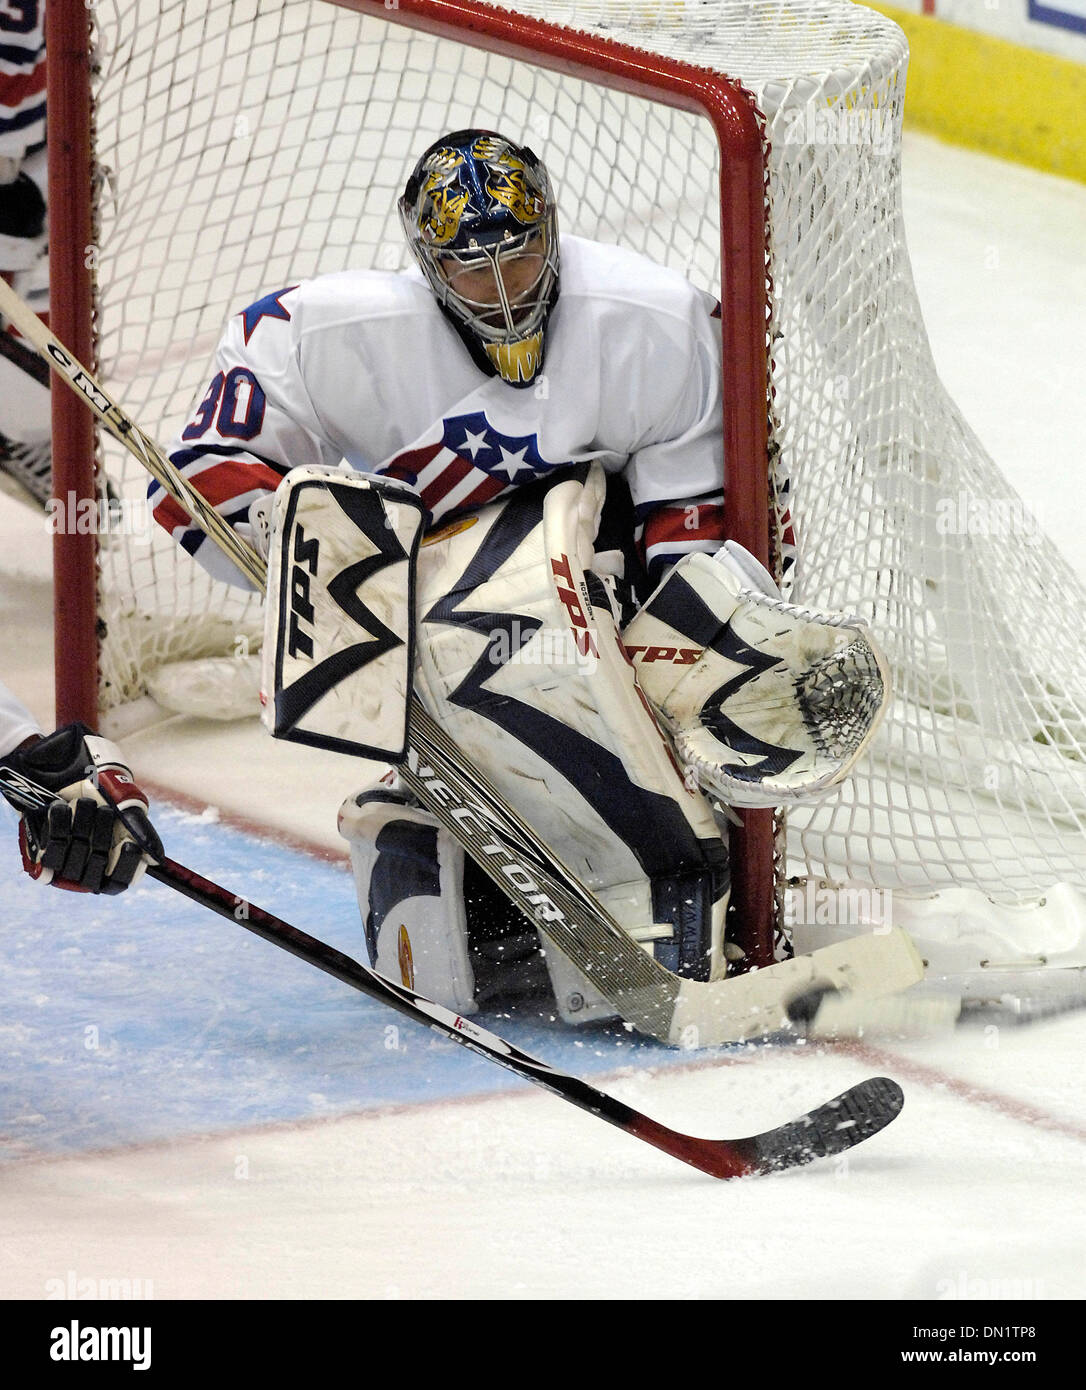 October 13, 2006: AHL - Rochester goalie Craig Anderson (30) makes a save while playing Binghamton - Binghamton Senators at Rochester Americans at The Blue Cross Arena in Rochester, New York. Rochester defeated Binghamton in a shootout.(Credit Image: © Alan Schwartz/Cal Sport Media) Stock Photo